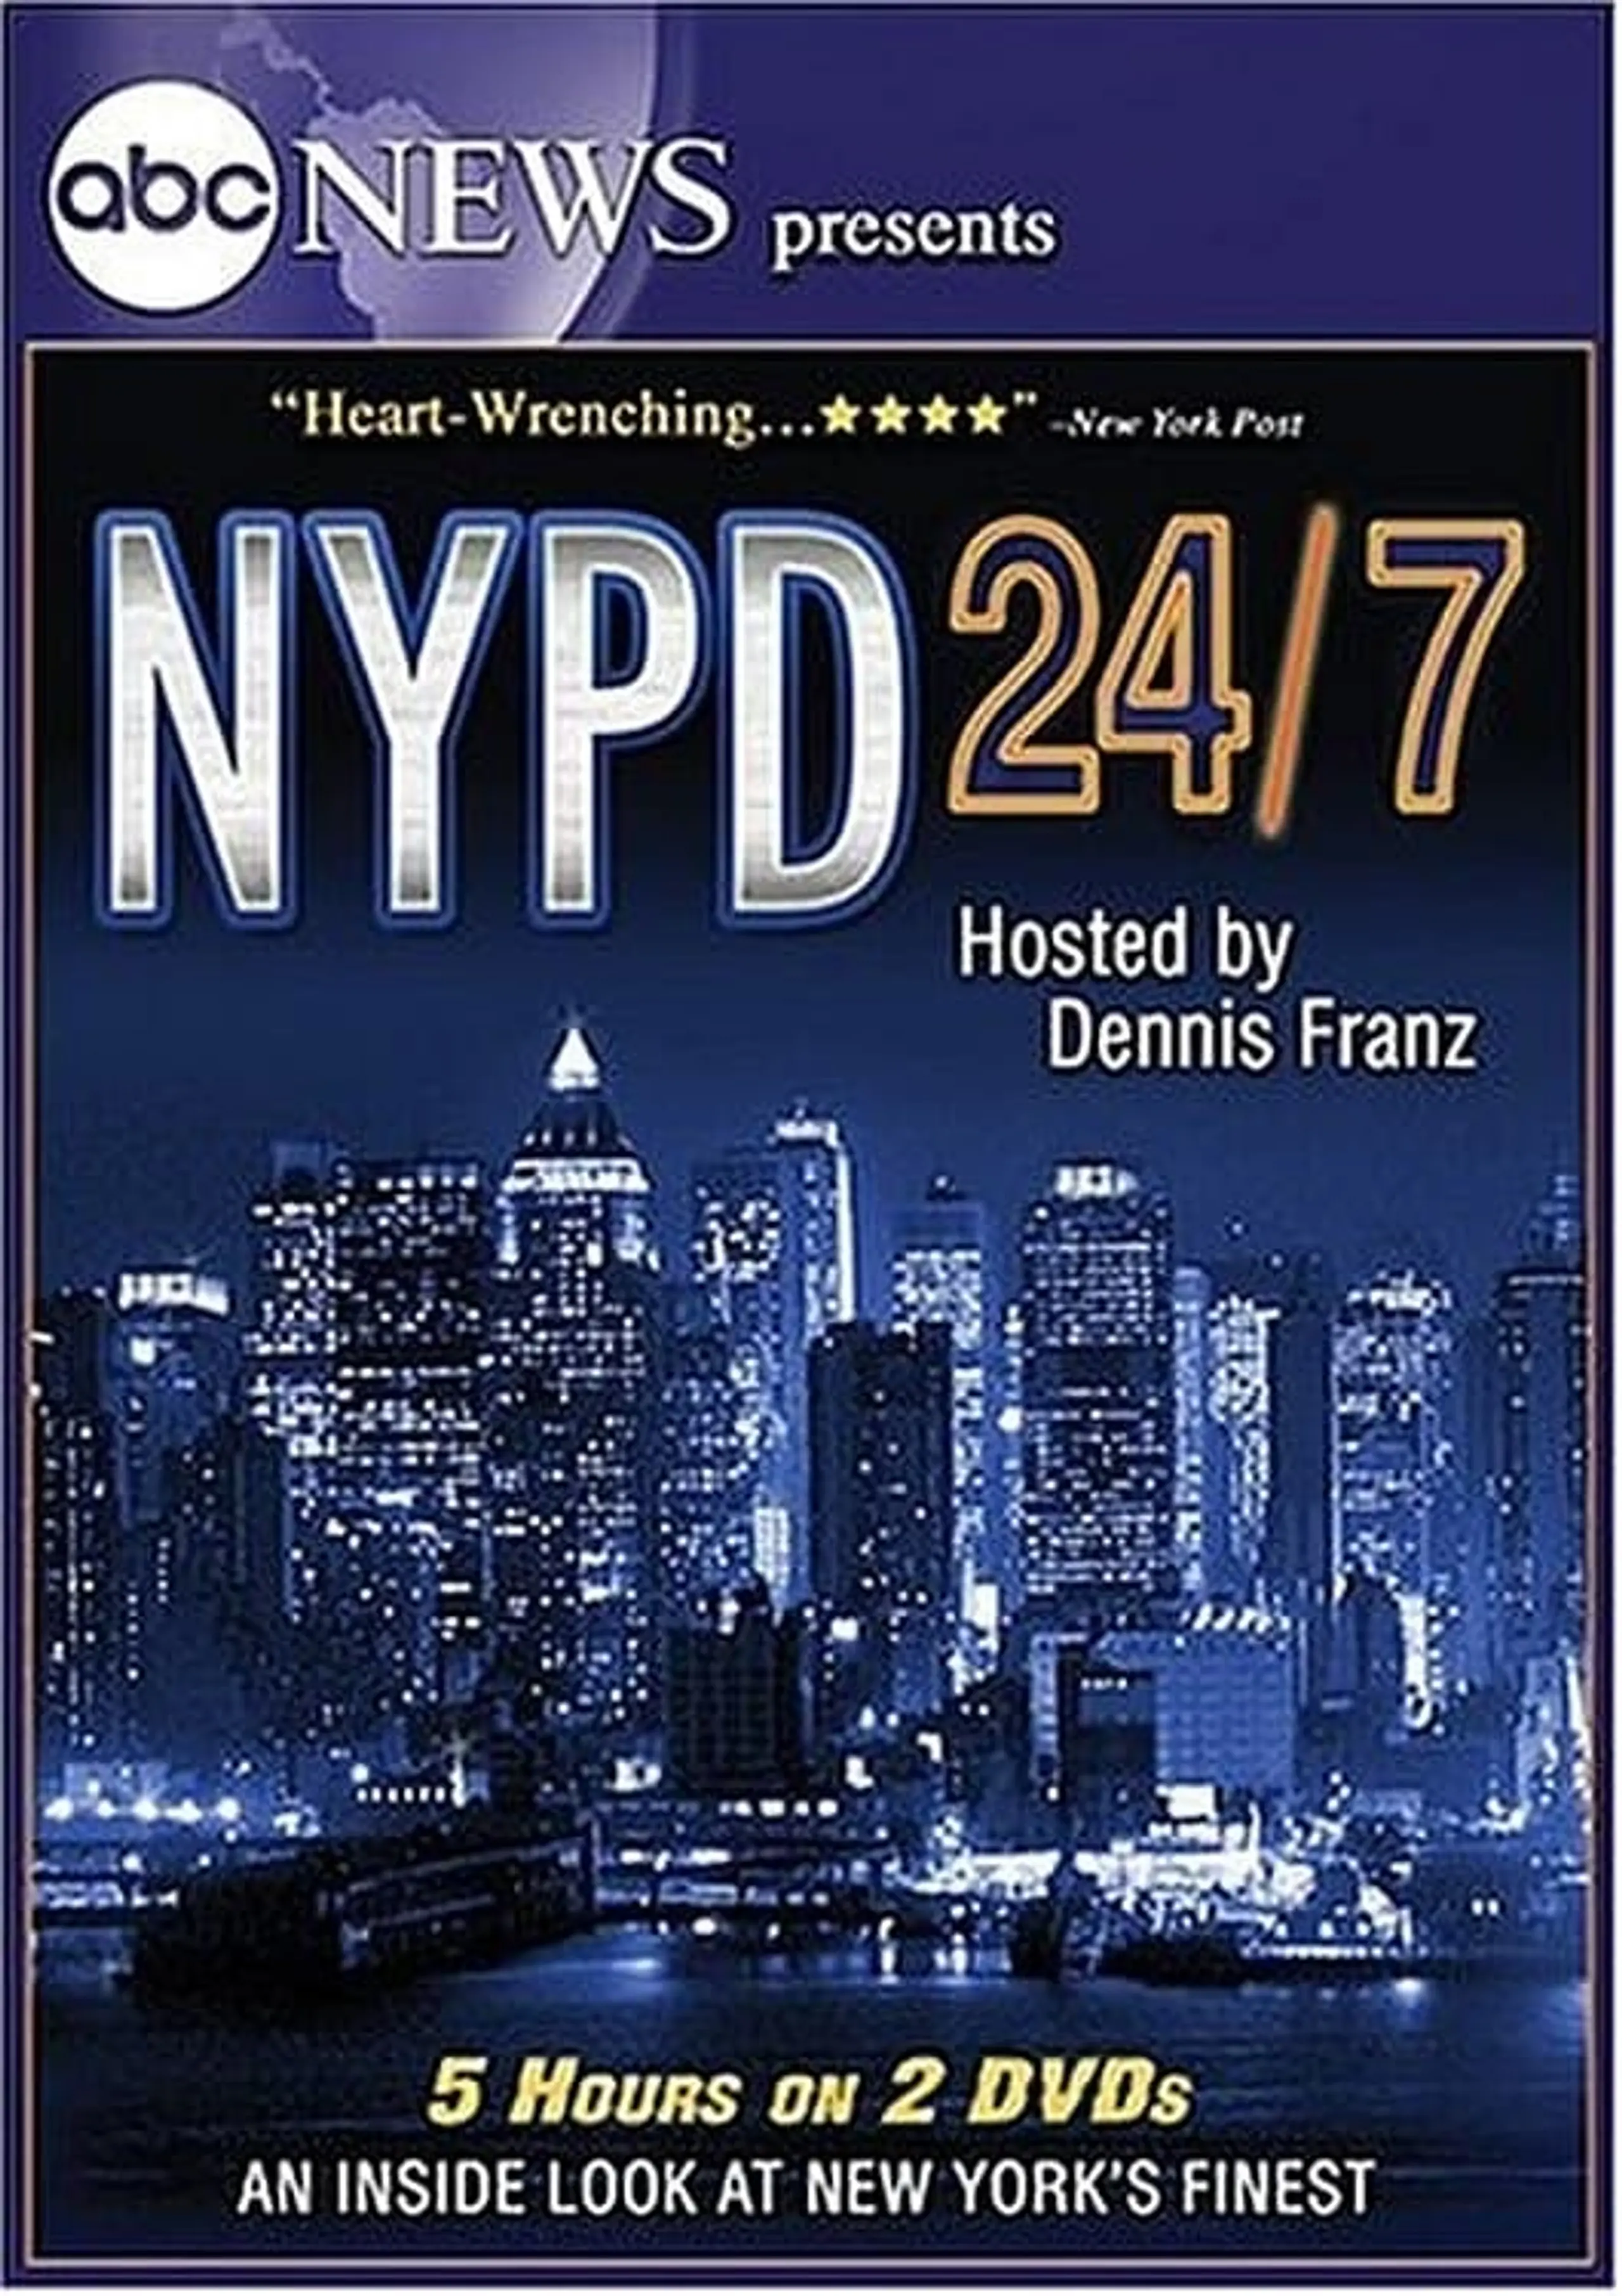 NYPD 24/7